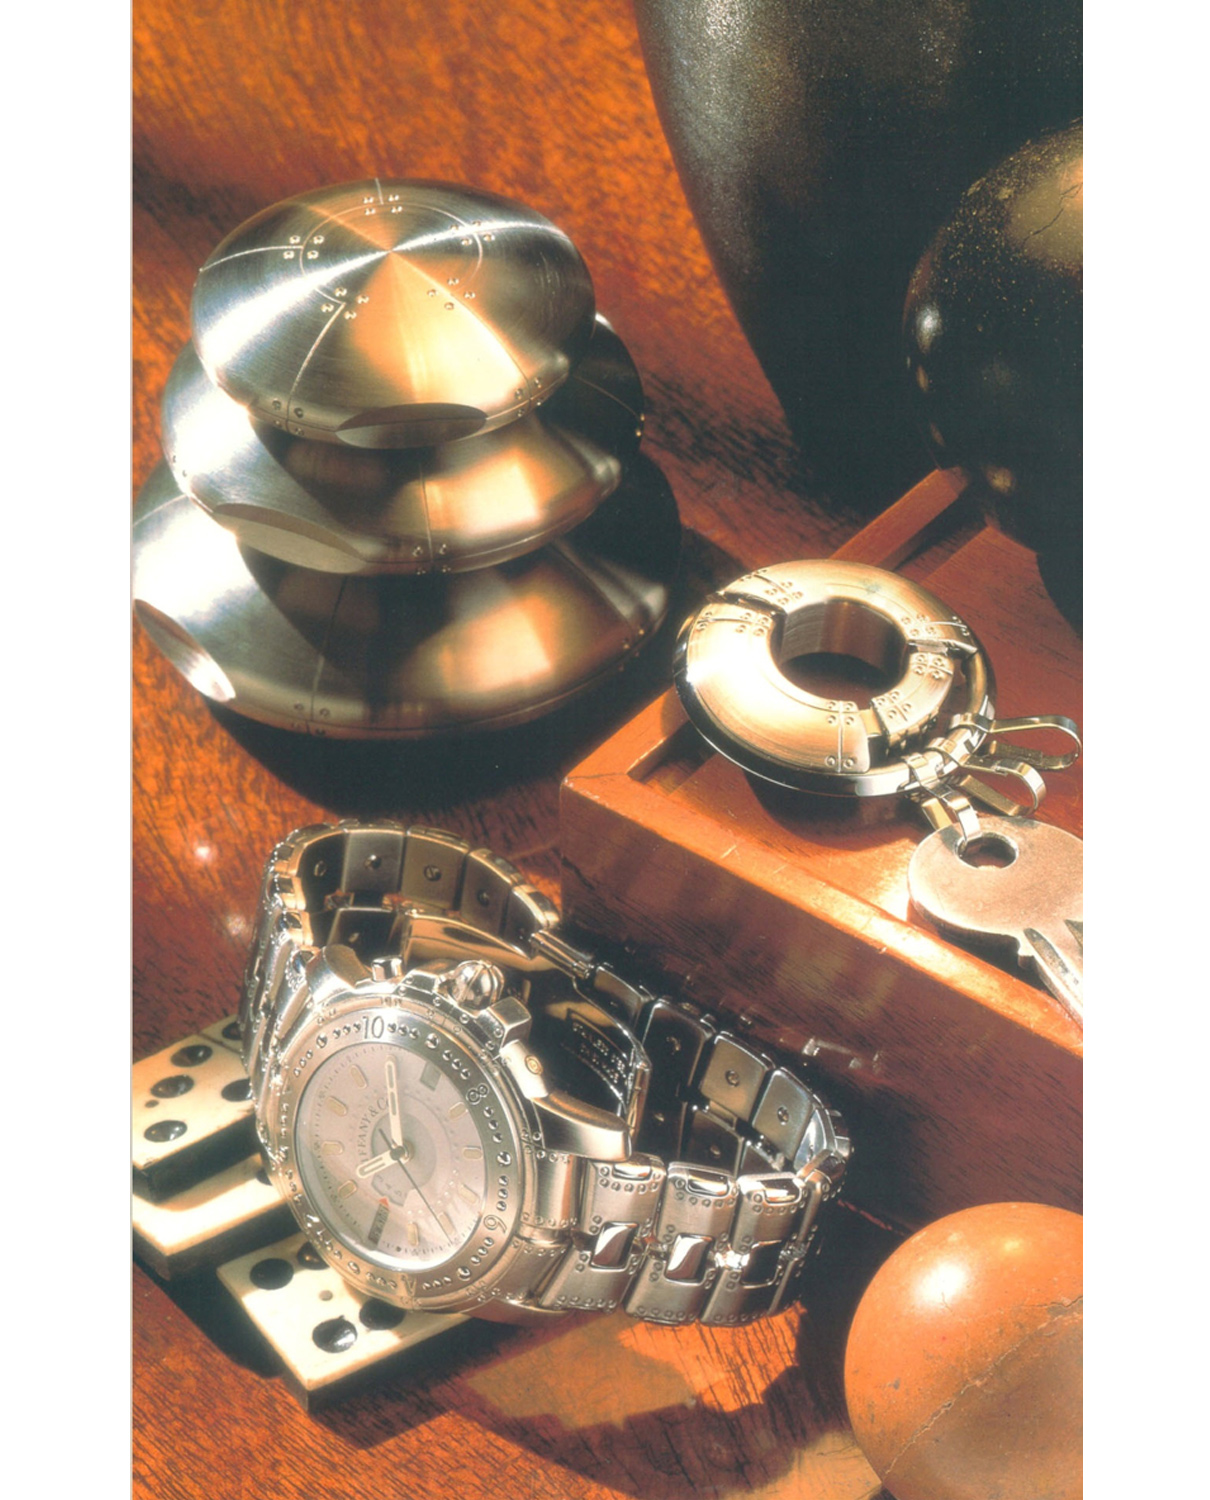 • Loring’s 1997 Book: Tiffany's 20th Century: A Portrait of American Style. 3 Perisphere Nesting Boxes, Porthole Key Ring, World Time Automatic Watch.